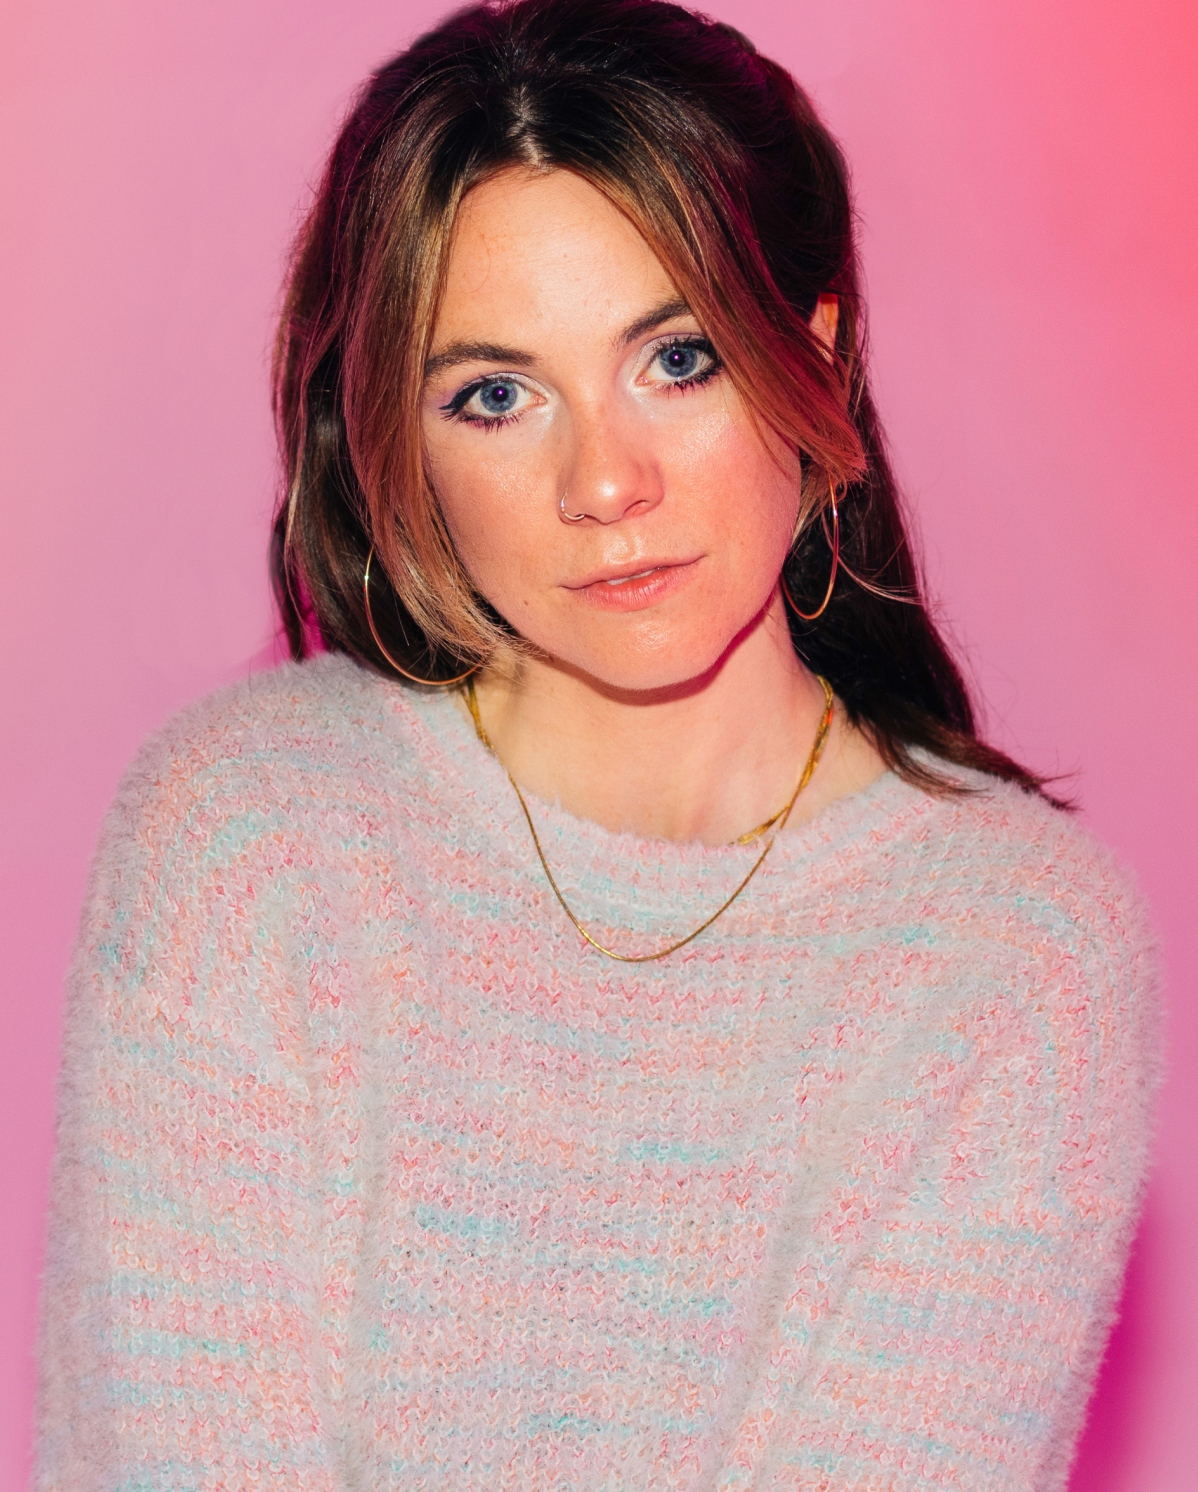 A young woman with long brown hair is looking at the camera against a pink background. She is wearing a pastel-colored sweater, hoop earrings, and a delicate gold necklace. The lighting gives the image a soft, warm tone.